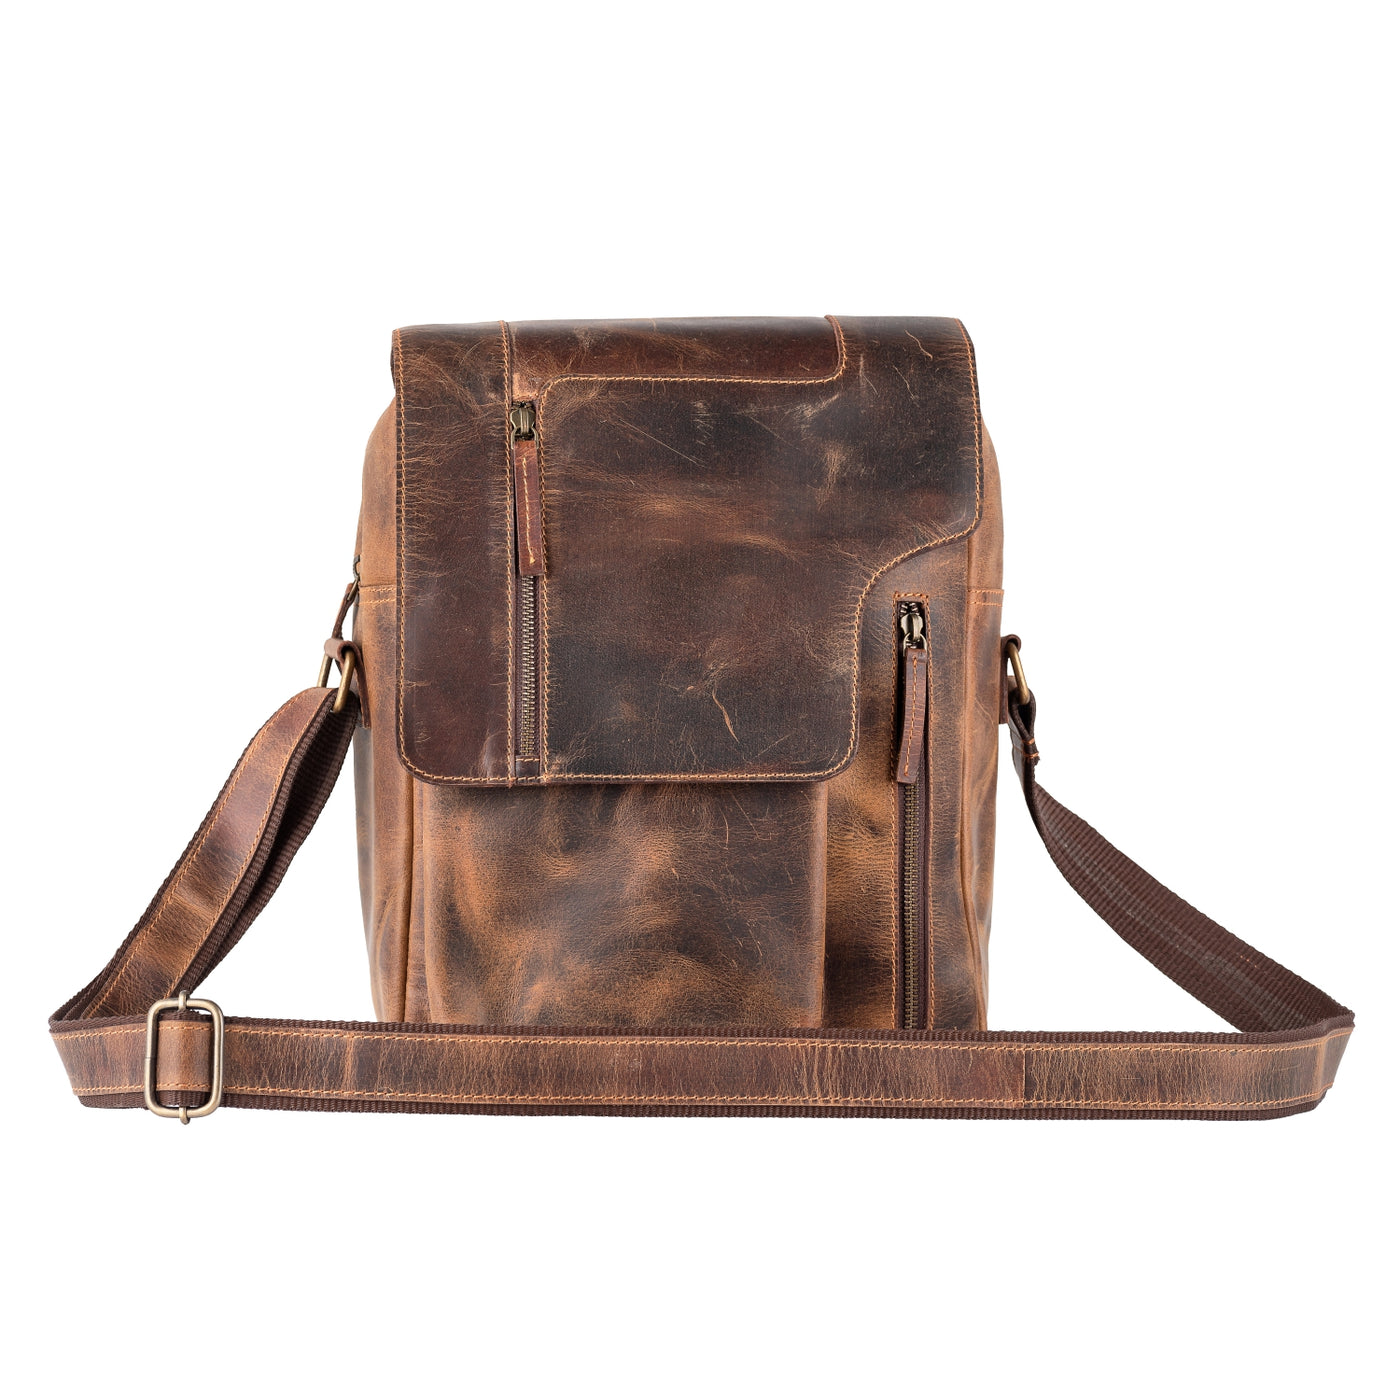 The Parker Crossbody/Messenger Bag is great for the busy person on the go. Pack your Tablet, notebooks, pens, a snack all in a distressed leather bag. Exterior & interior slip pockets. Adjustable strap allows this bag to be worn as convenient crossbody/messenger style.  Available also in our Smyrna ,TN shop just outside Nashville. Product made in India.